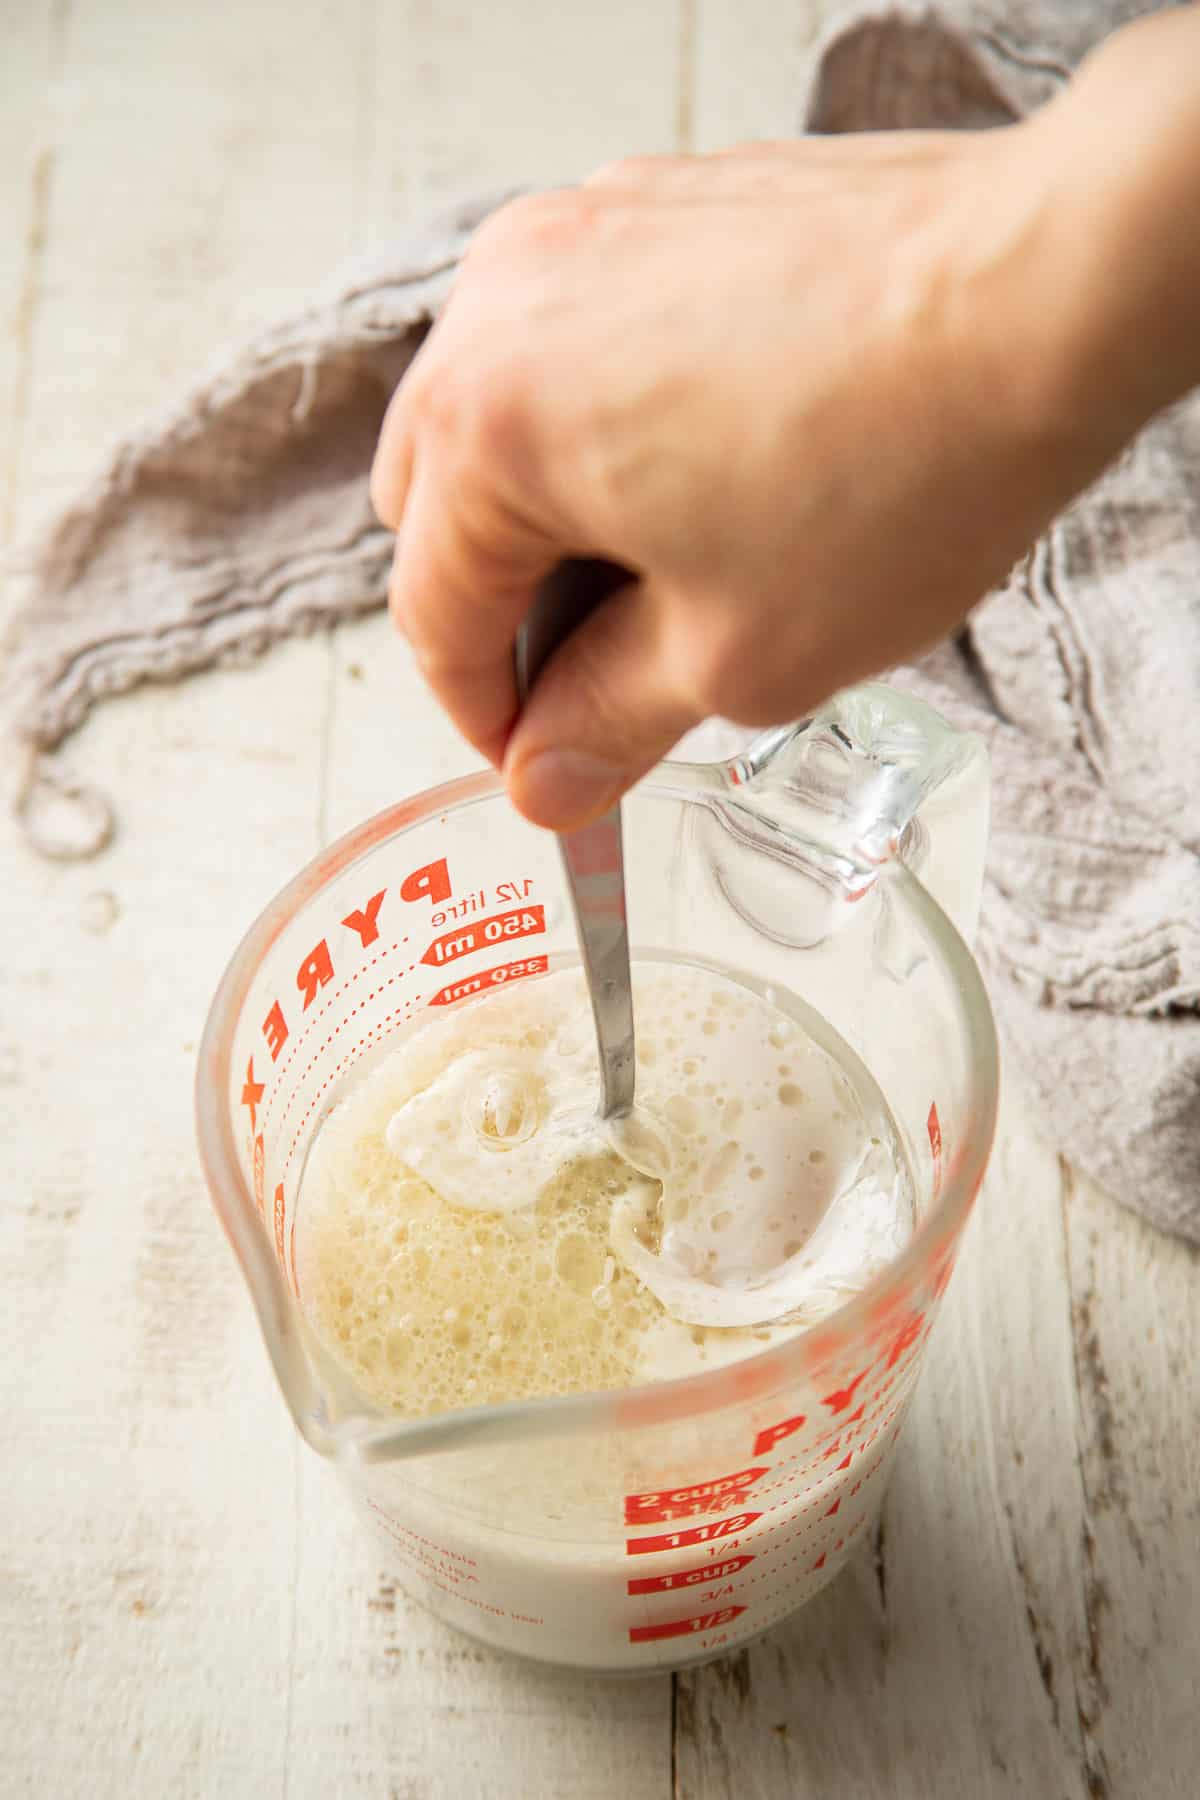 Hand stirring liquid ingredients for pancake batter together in a liquid measuring cup.